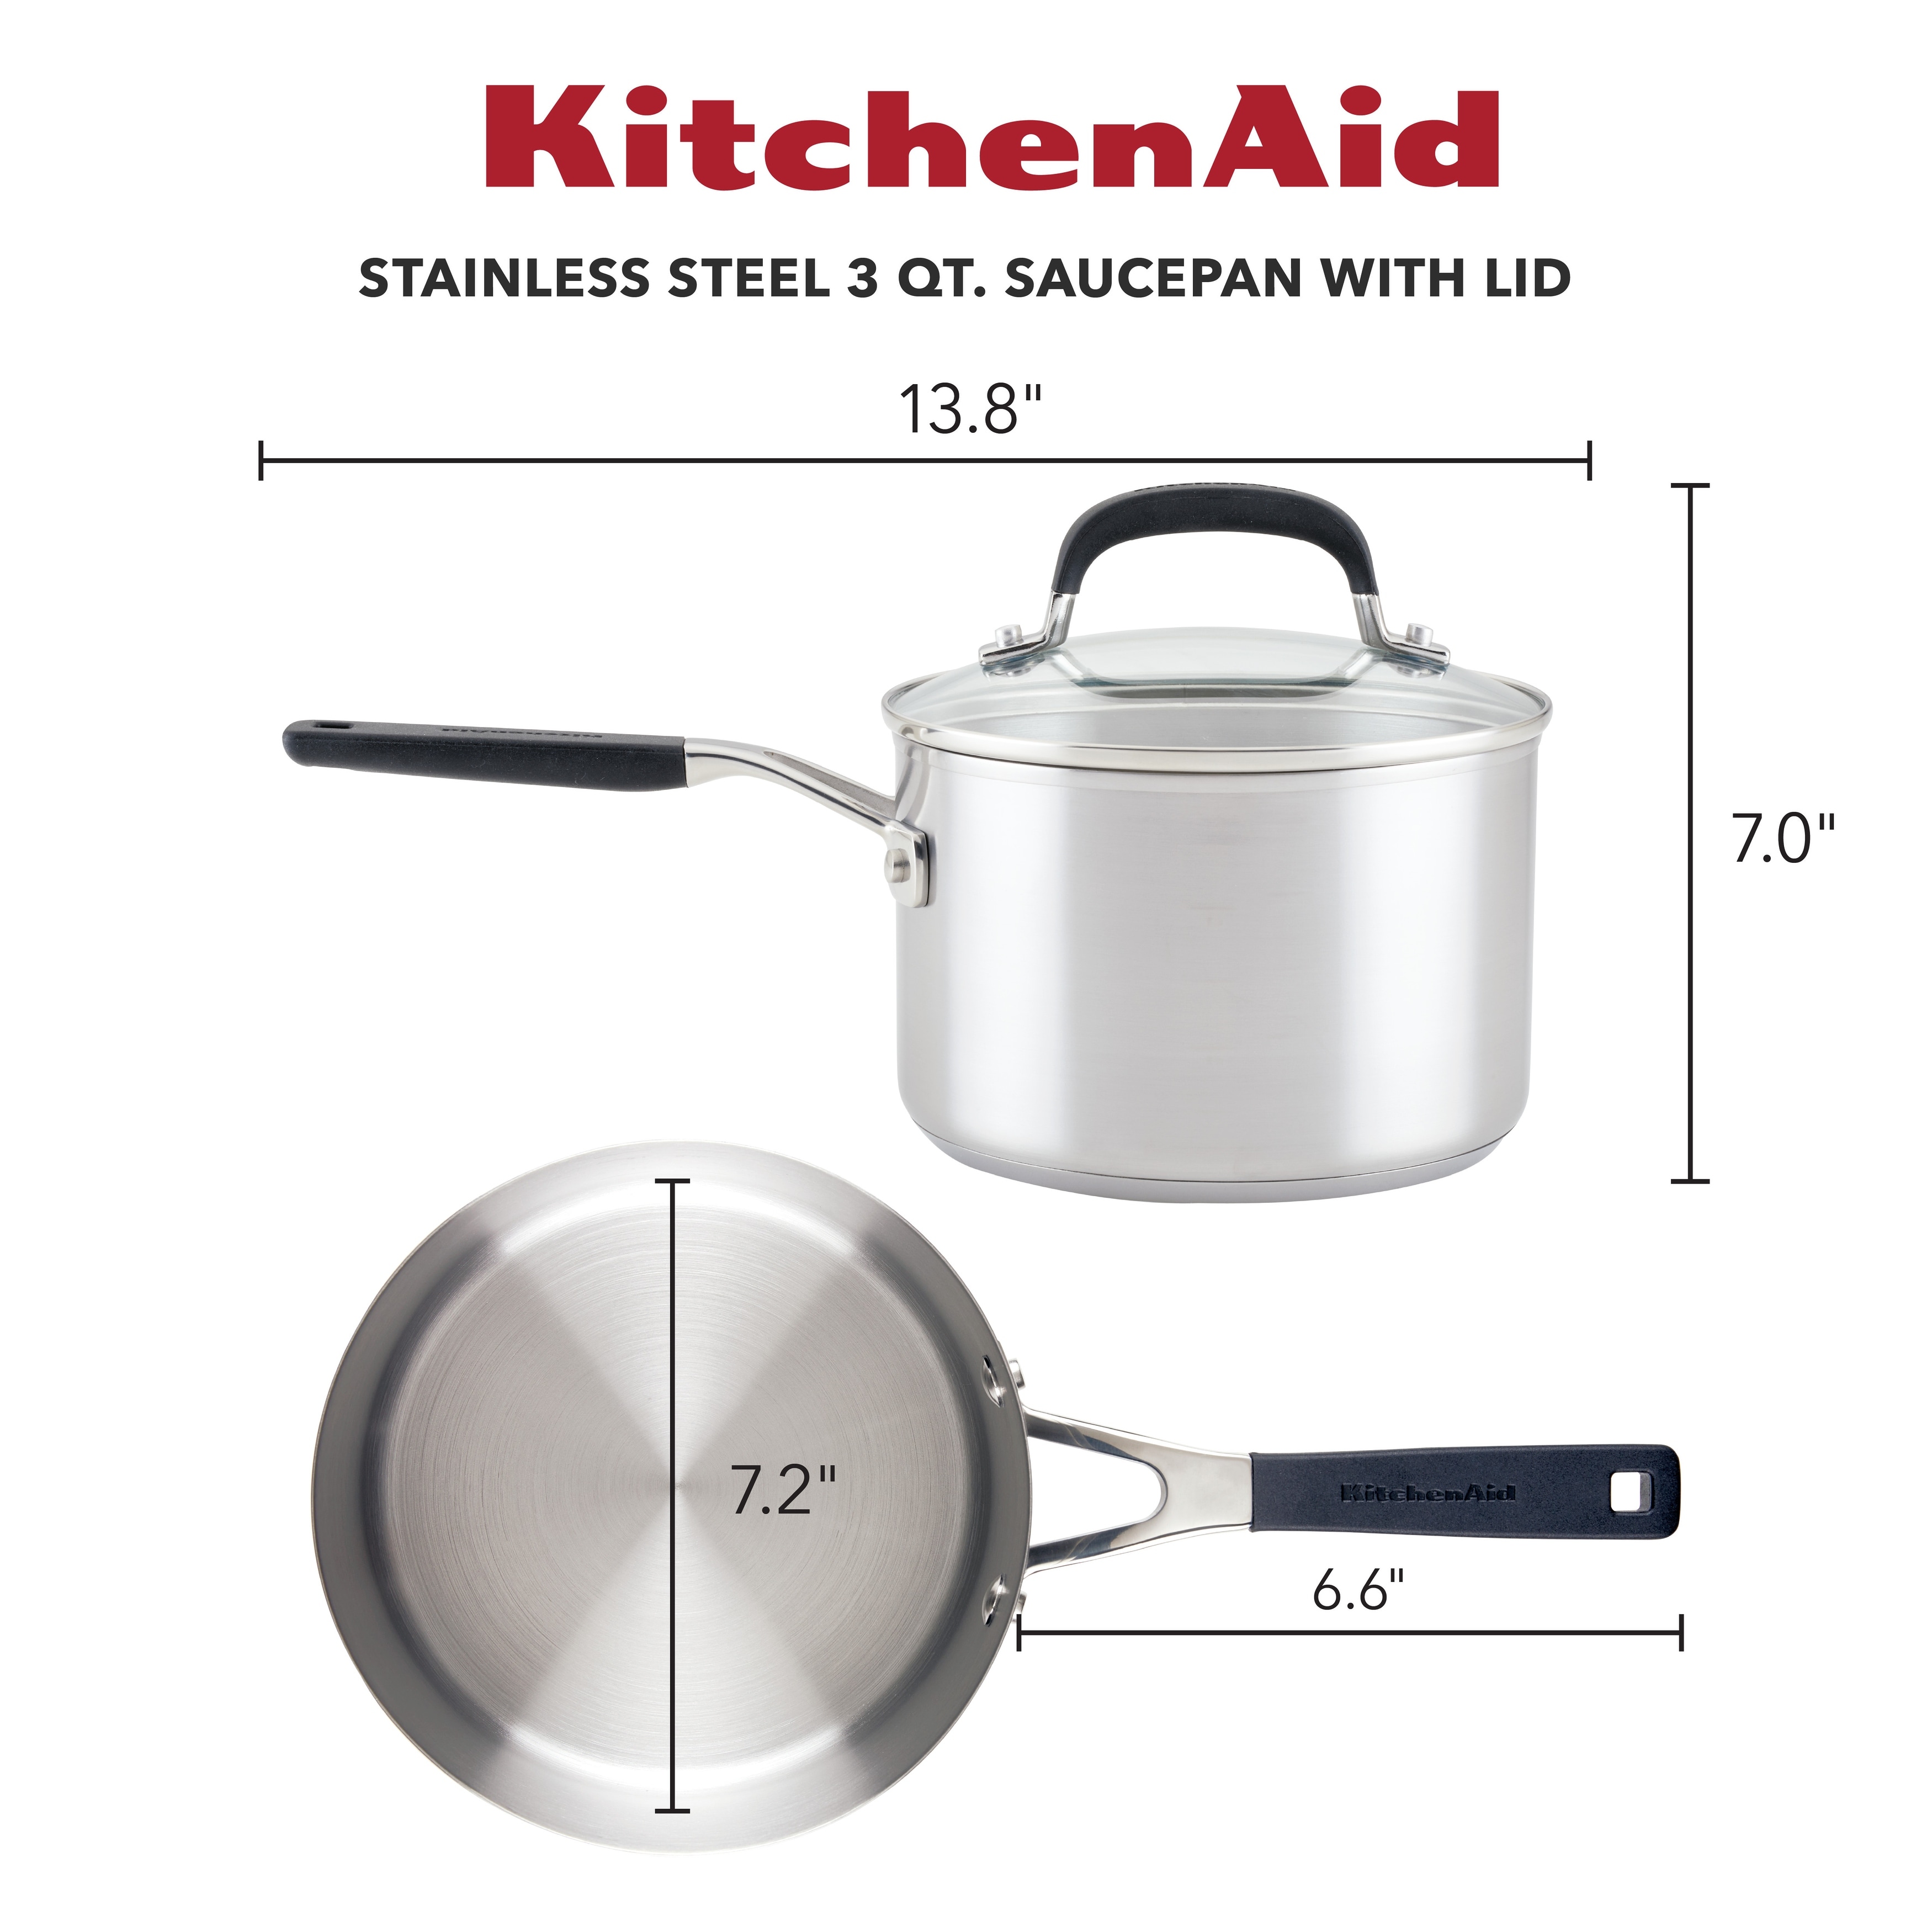 https://ak1.ostkcdn.com/images/products/is/images/direct/92fbe8f662d8c75cbc4d07471e4e6b0594dcc65e/KitchenAid-Stainless-Steel-Induction-Saucepan-with-Lid%2C-3-Quart%2C-Brushed-Stainless-Steel.jpg